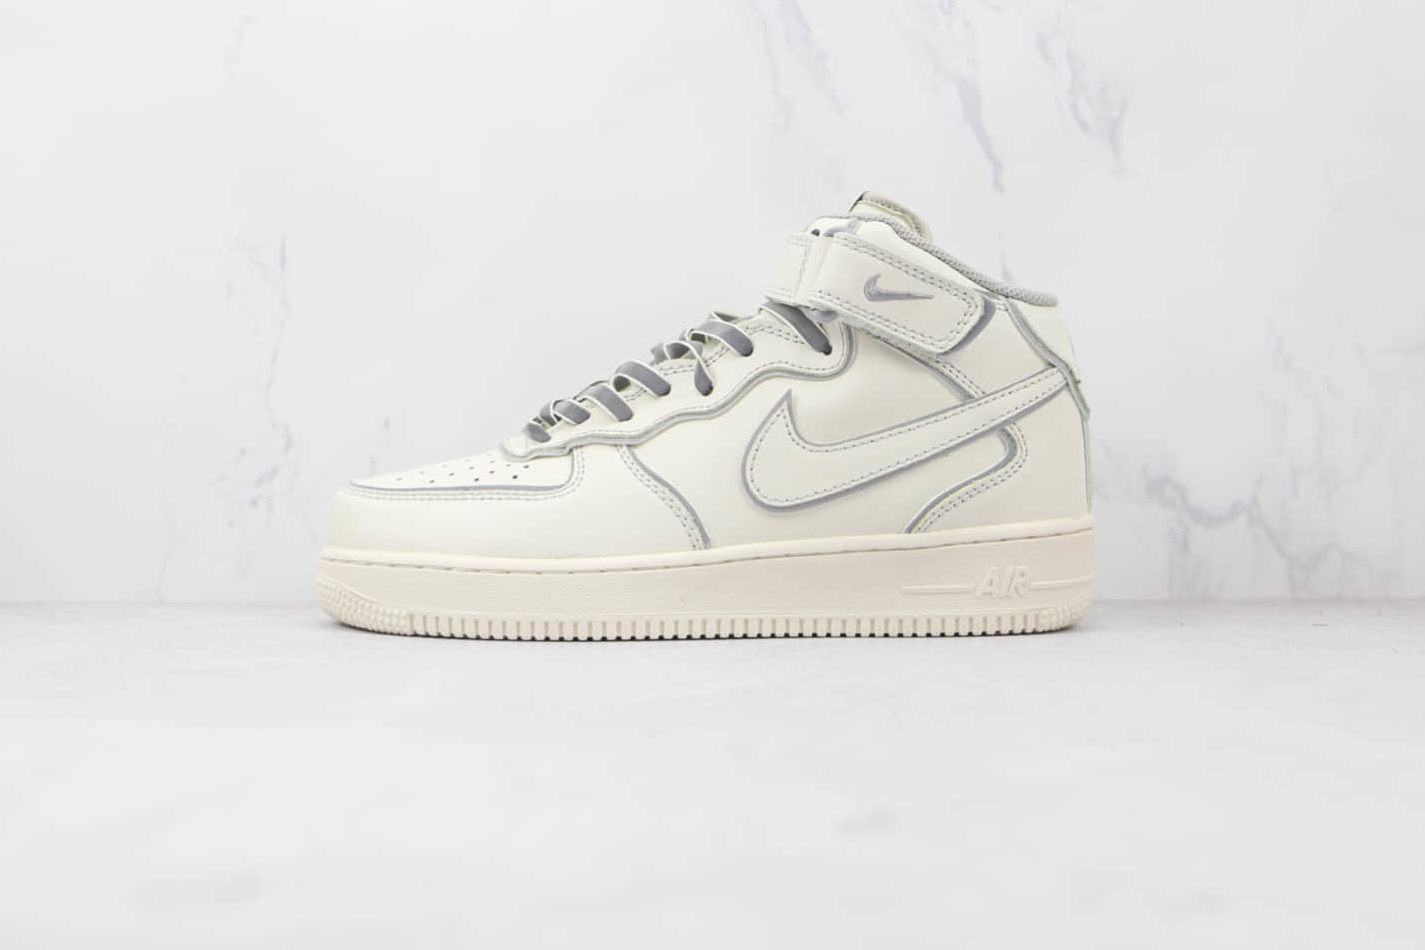 Nike Air Force 1 07 Mid Daredevil Beige Grey White AQ1218-118 - Shop now and elevate your style with these iconic sneakers